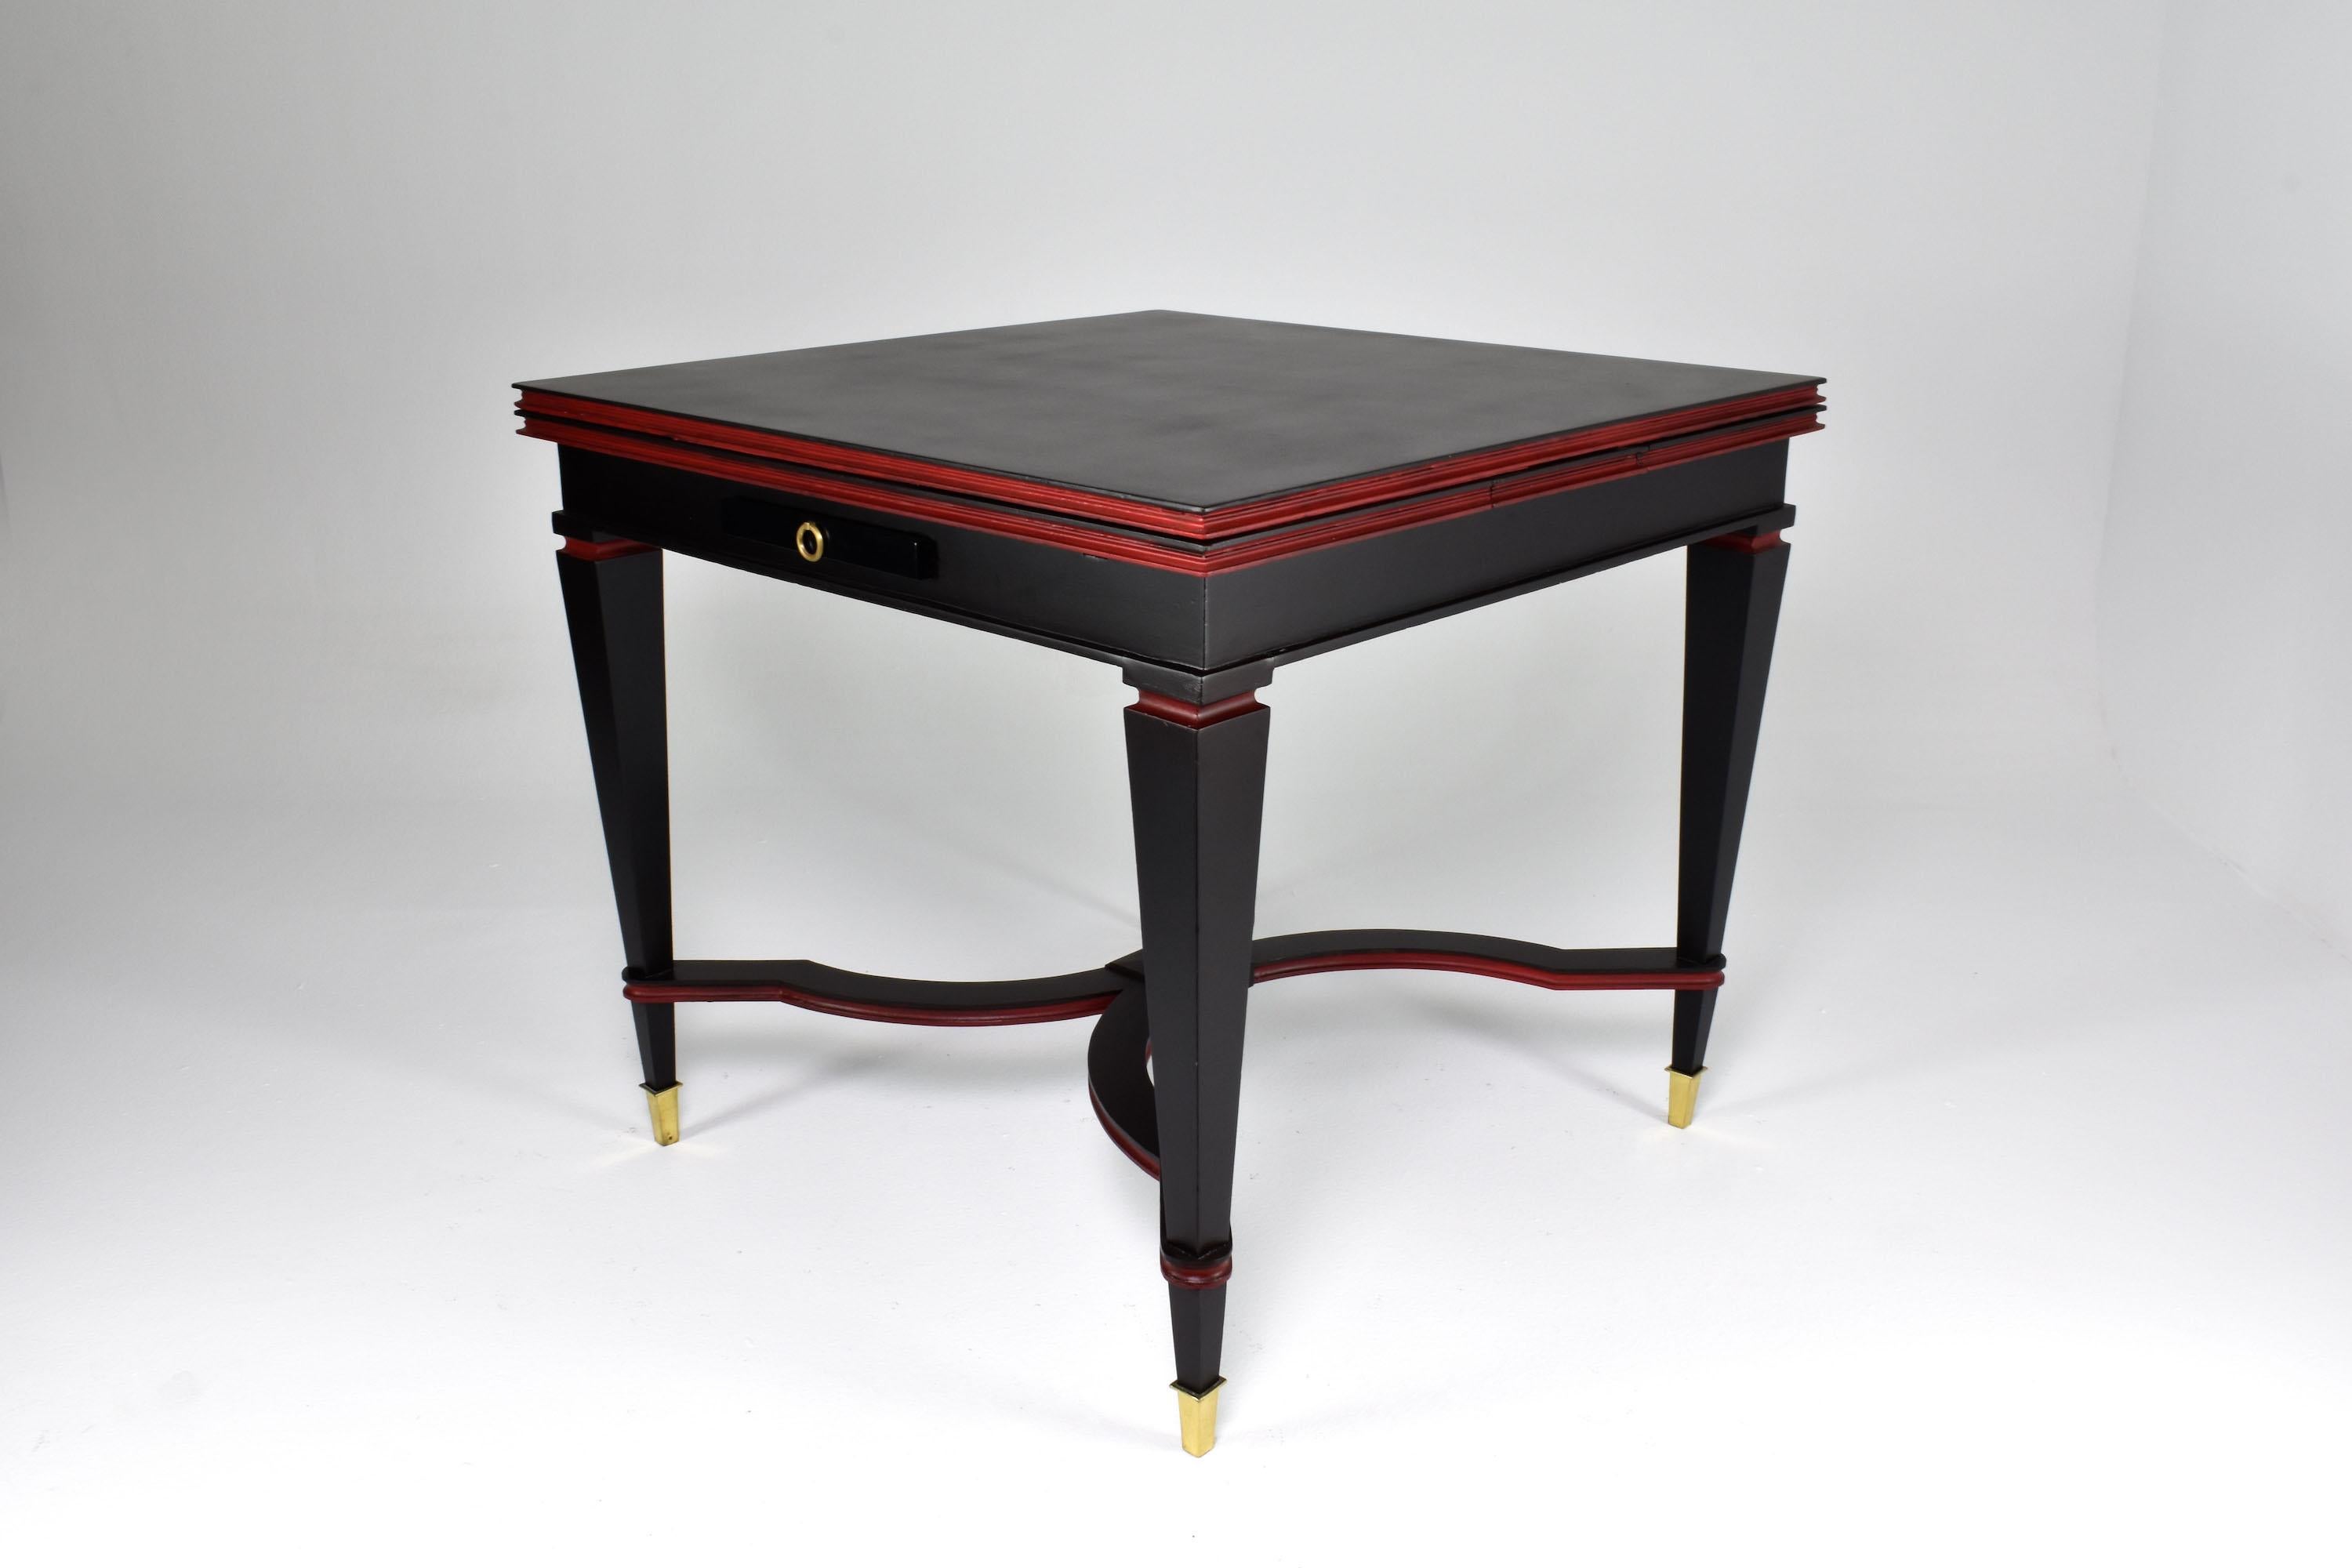 A square-shaped game table from the 1960s, made in Italy in an Art Deco style. It's extendable and can accommodate up to 4 people. The table has a criss-cross design on the bottom and curvaceous feet, showcasing excellent workmanship. It also